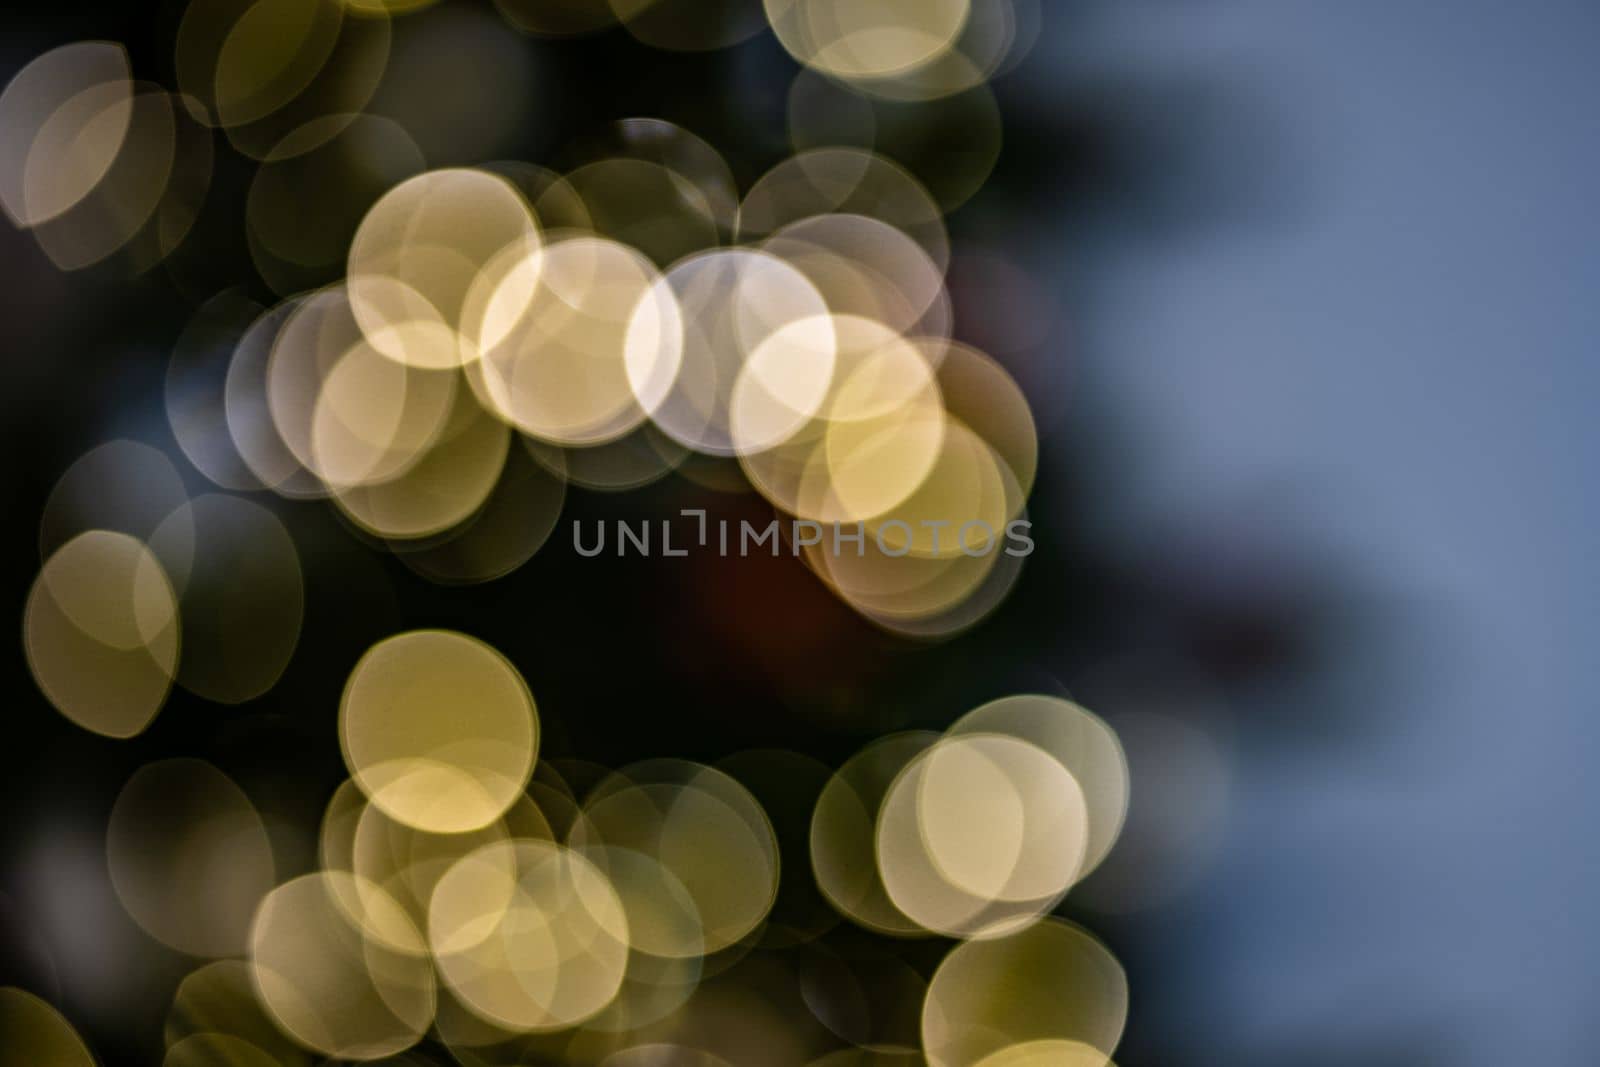 Blurred abstract lights with yellow and blue tones